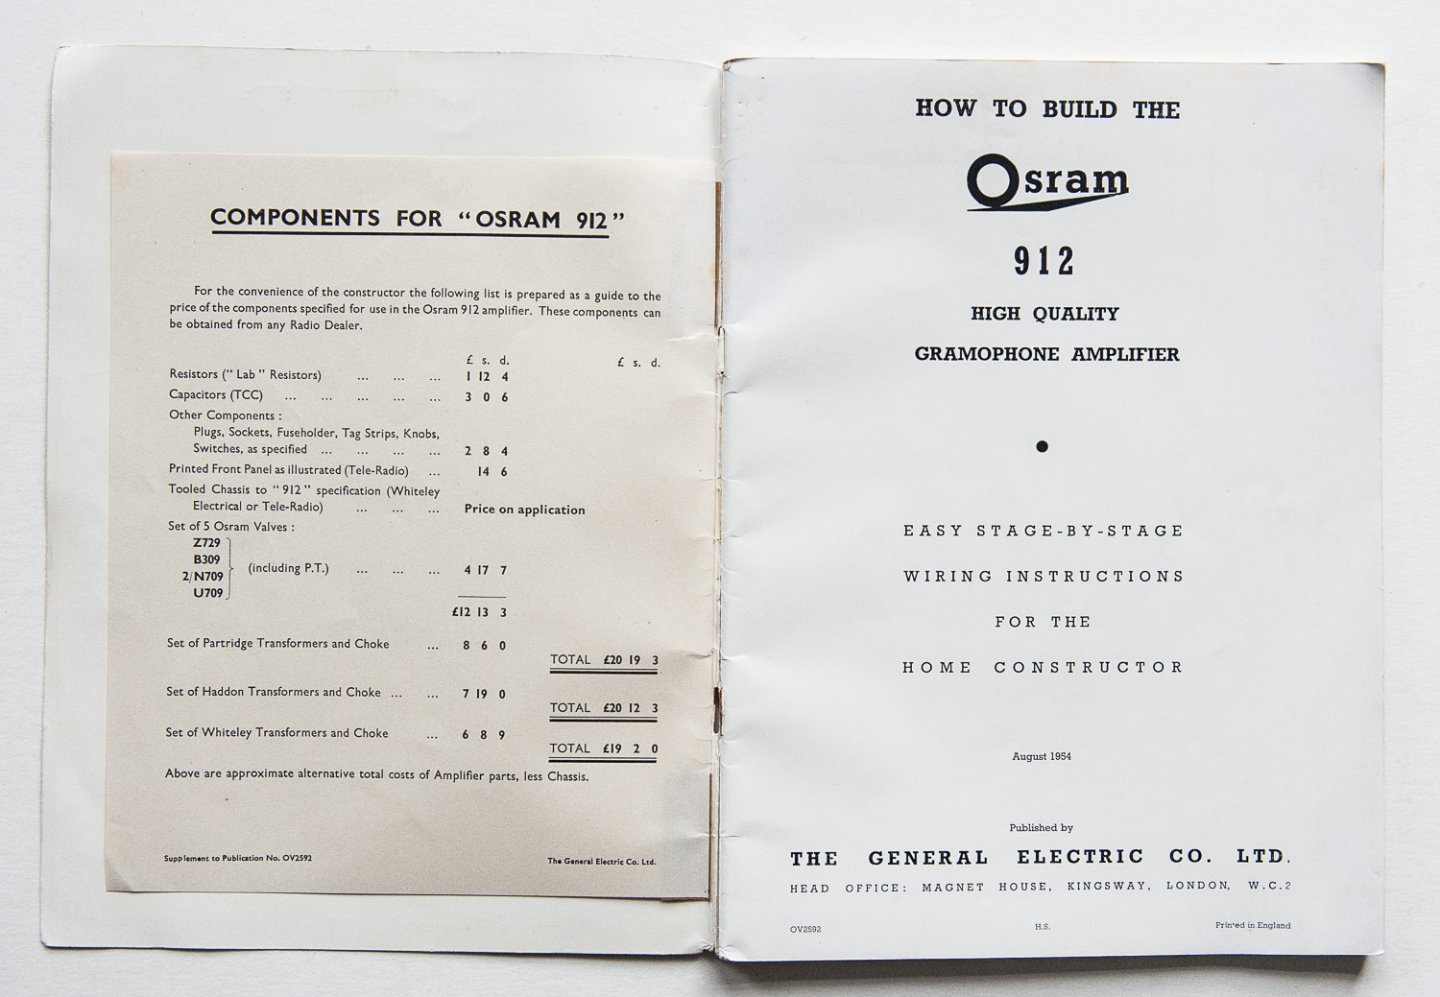  - How to build the Osram 912 High Quality gramophone amplifier - easy stage-by-stage wiring instructions for the home comstructor